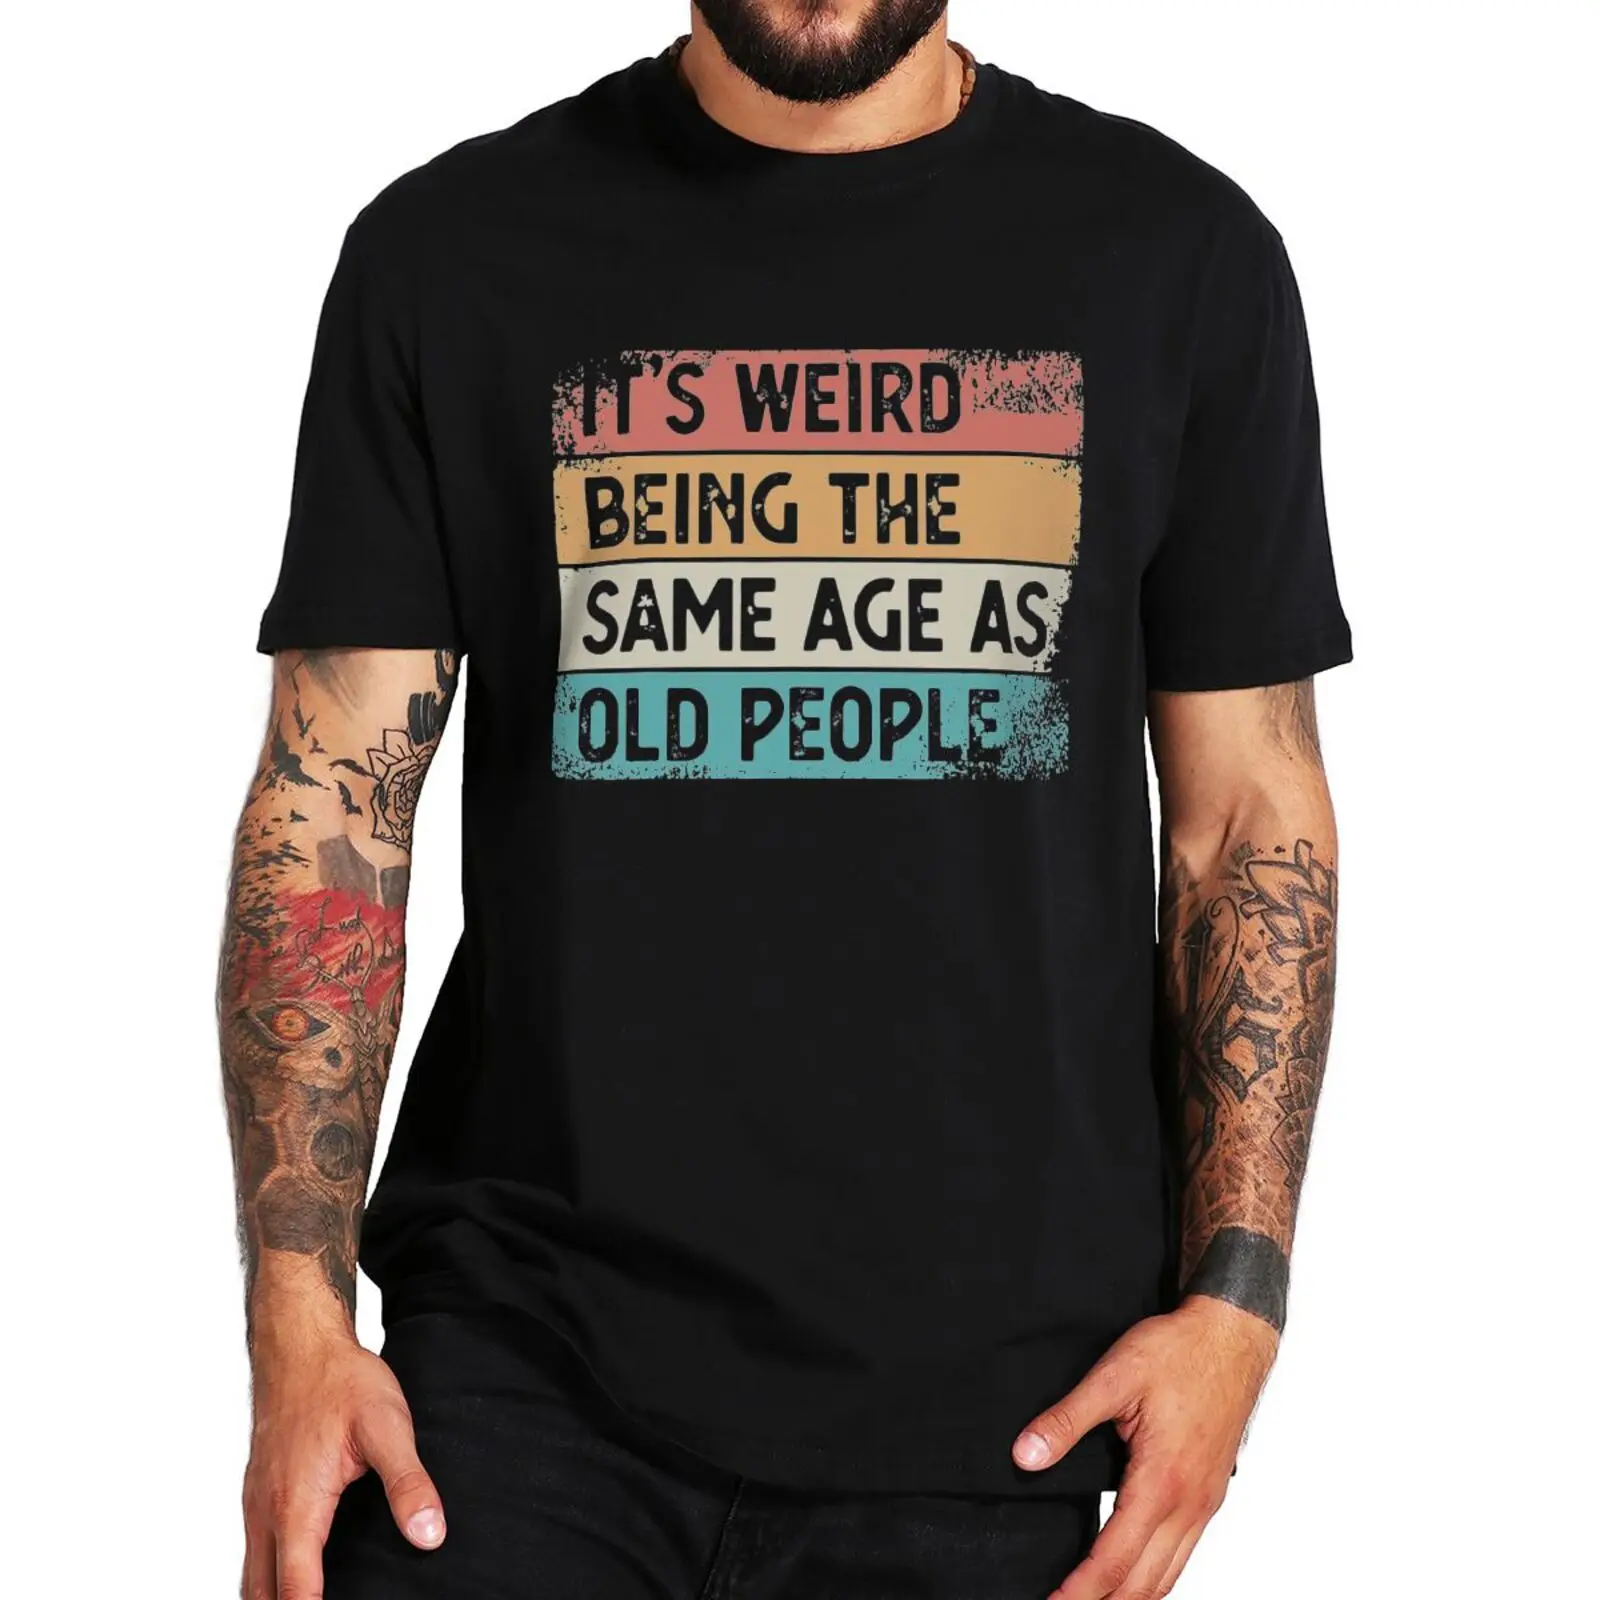 

It's Weird Being The Same Age As Old People T Shirt Retro Sarcastic Funny Gift Tops 100% Cotton Unisex Casual T-shirts EU Size